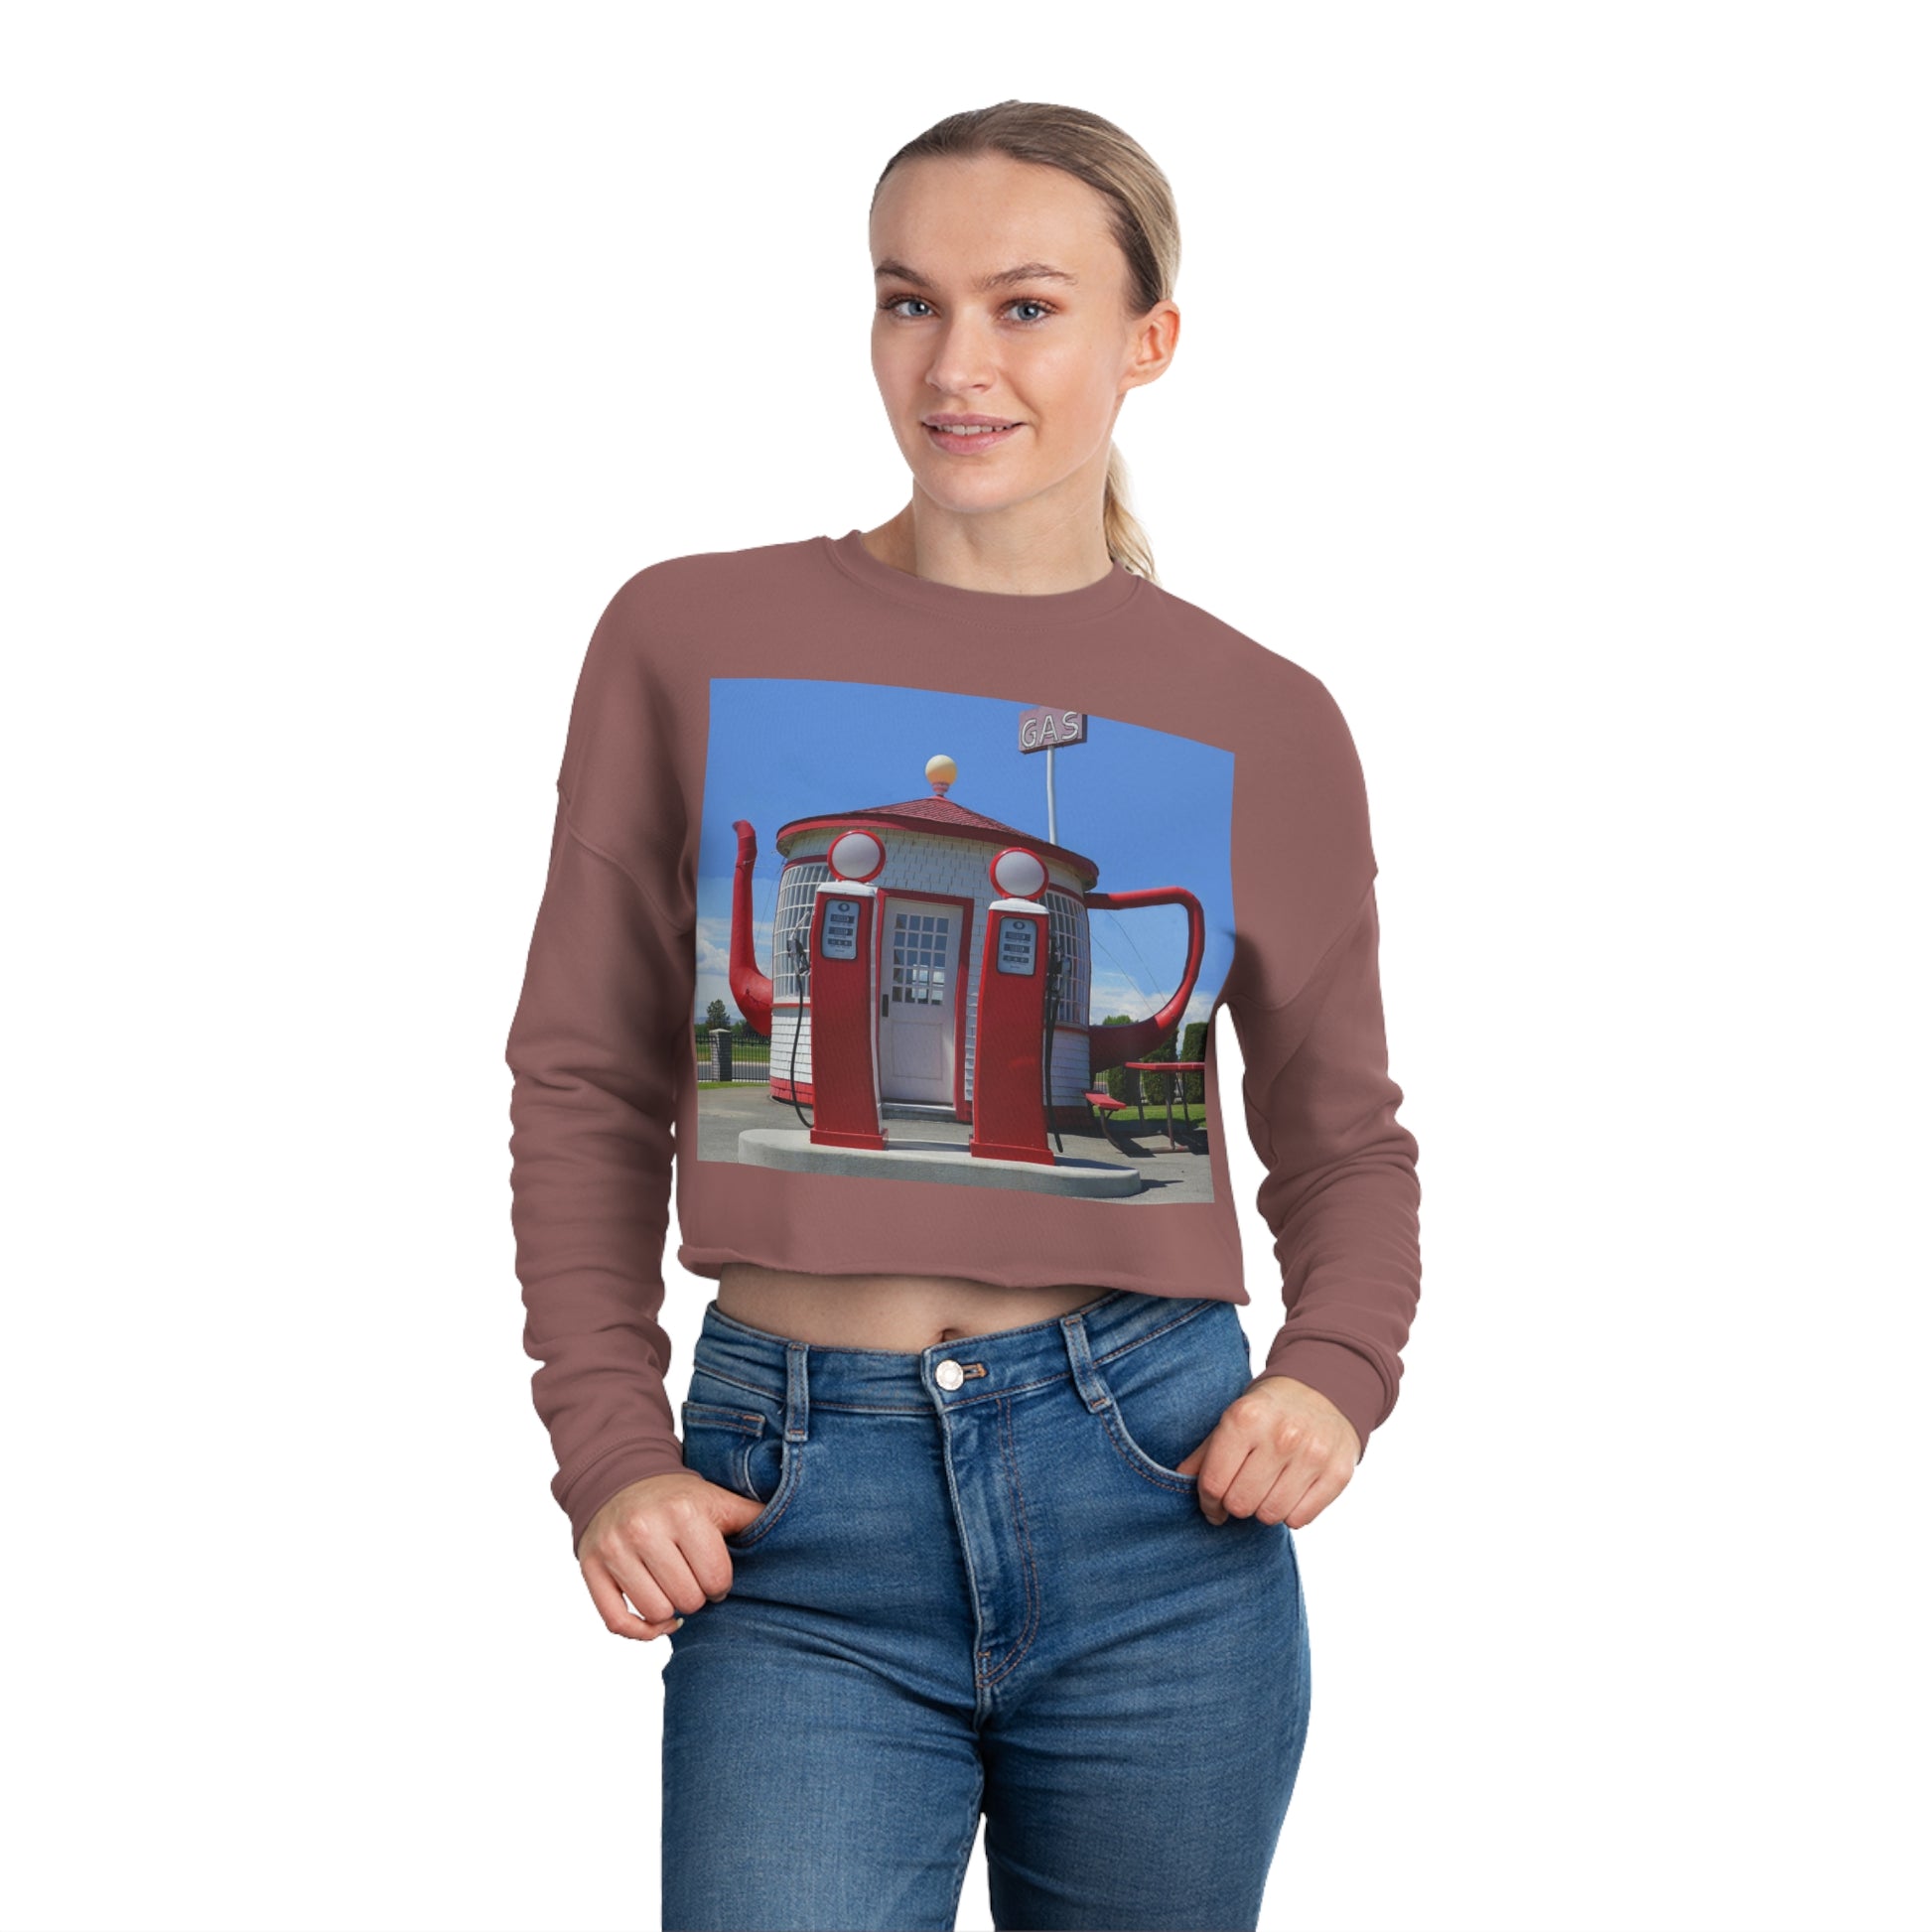 Awesome Teapot Dome Service Station - Women's Cropped Sweatshirt - Fry1Productions